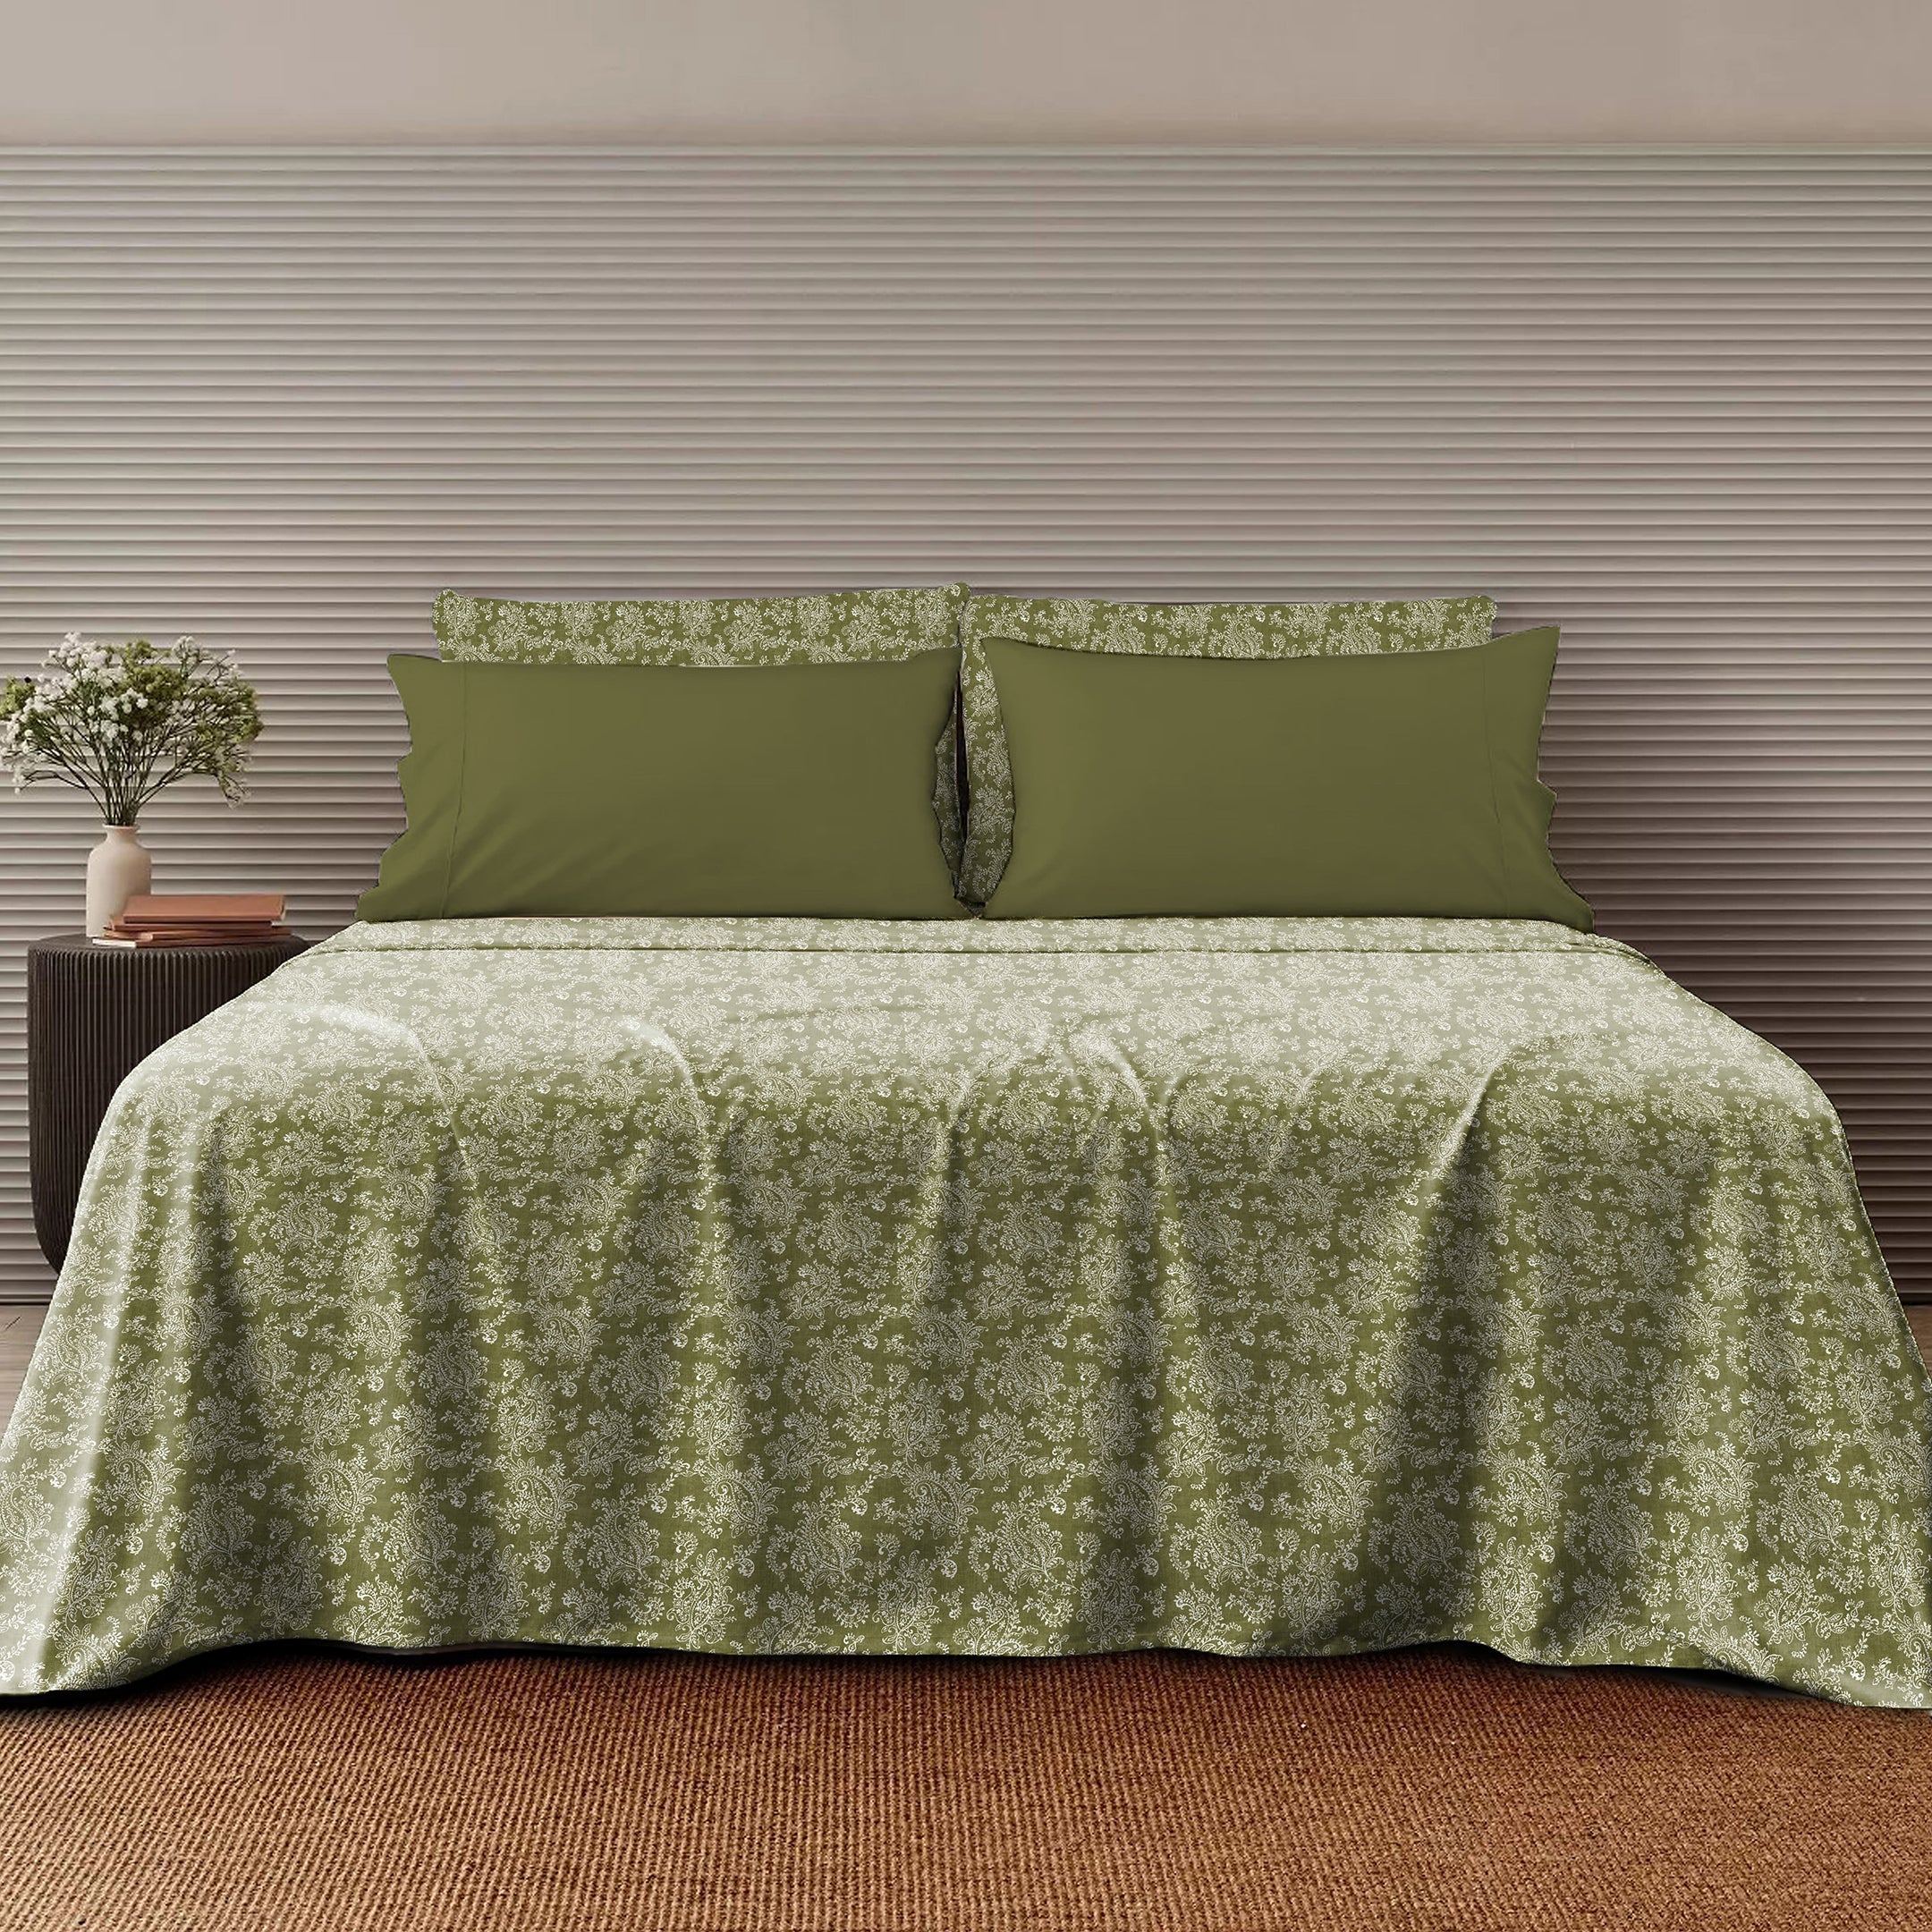 Jodhpur Flowers Bedsheet for Double Bed with 2 PillowCovers King Size (104" X 90") Olive